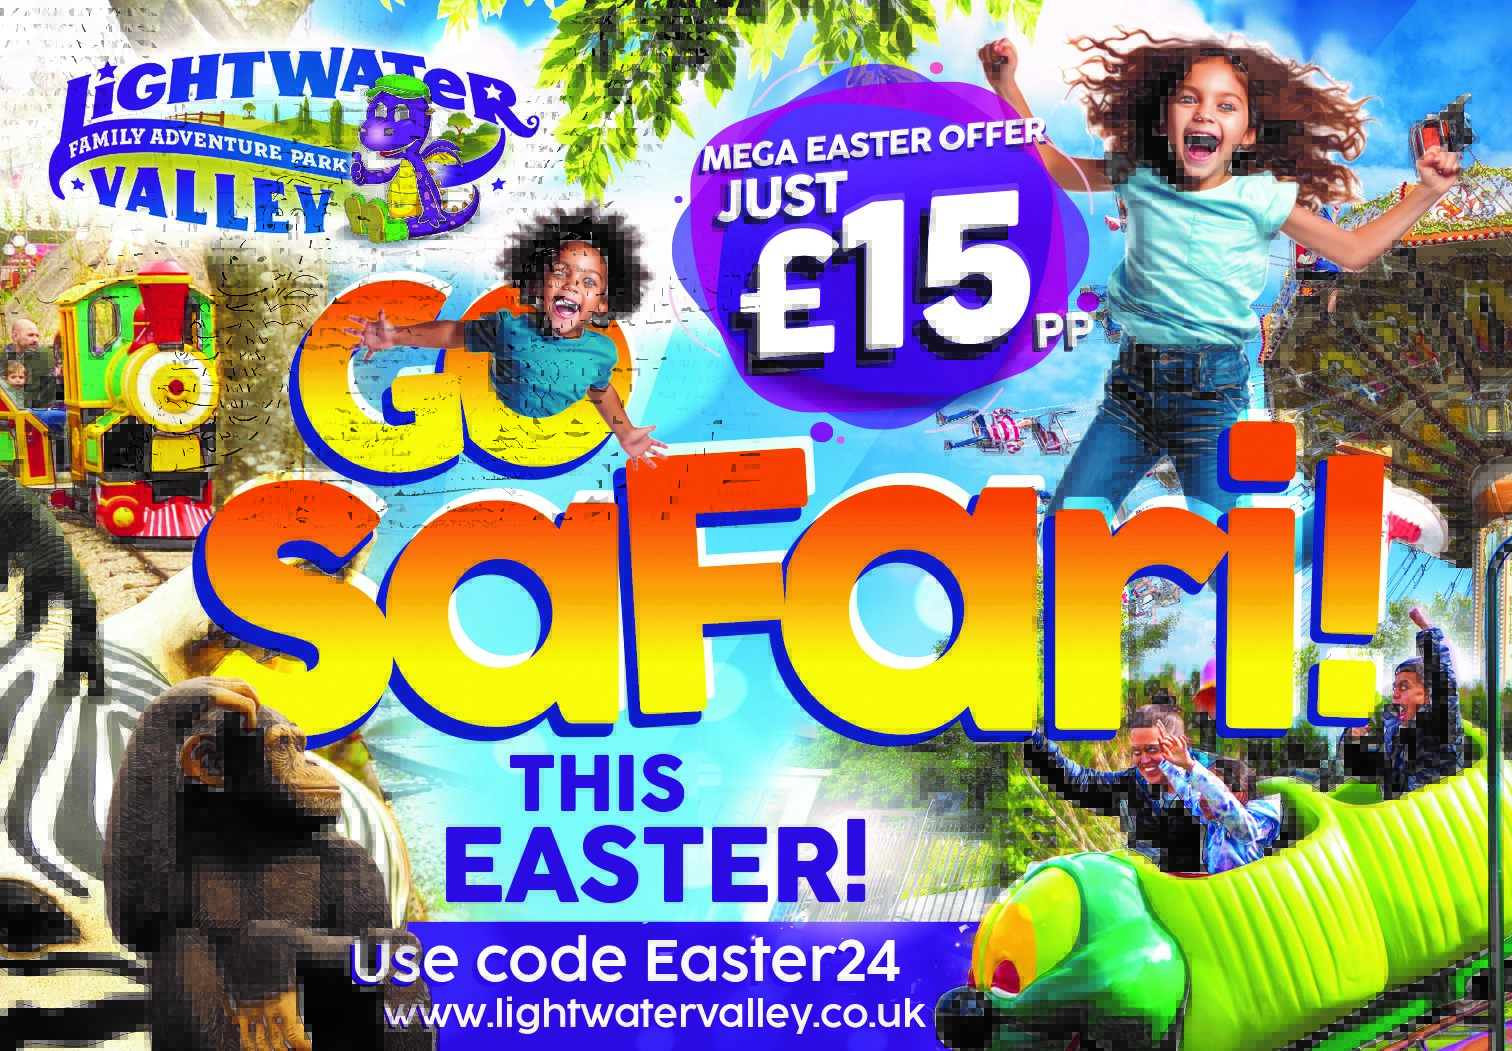 Go Safari this Easter at Lightwater Valley